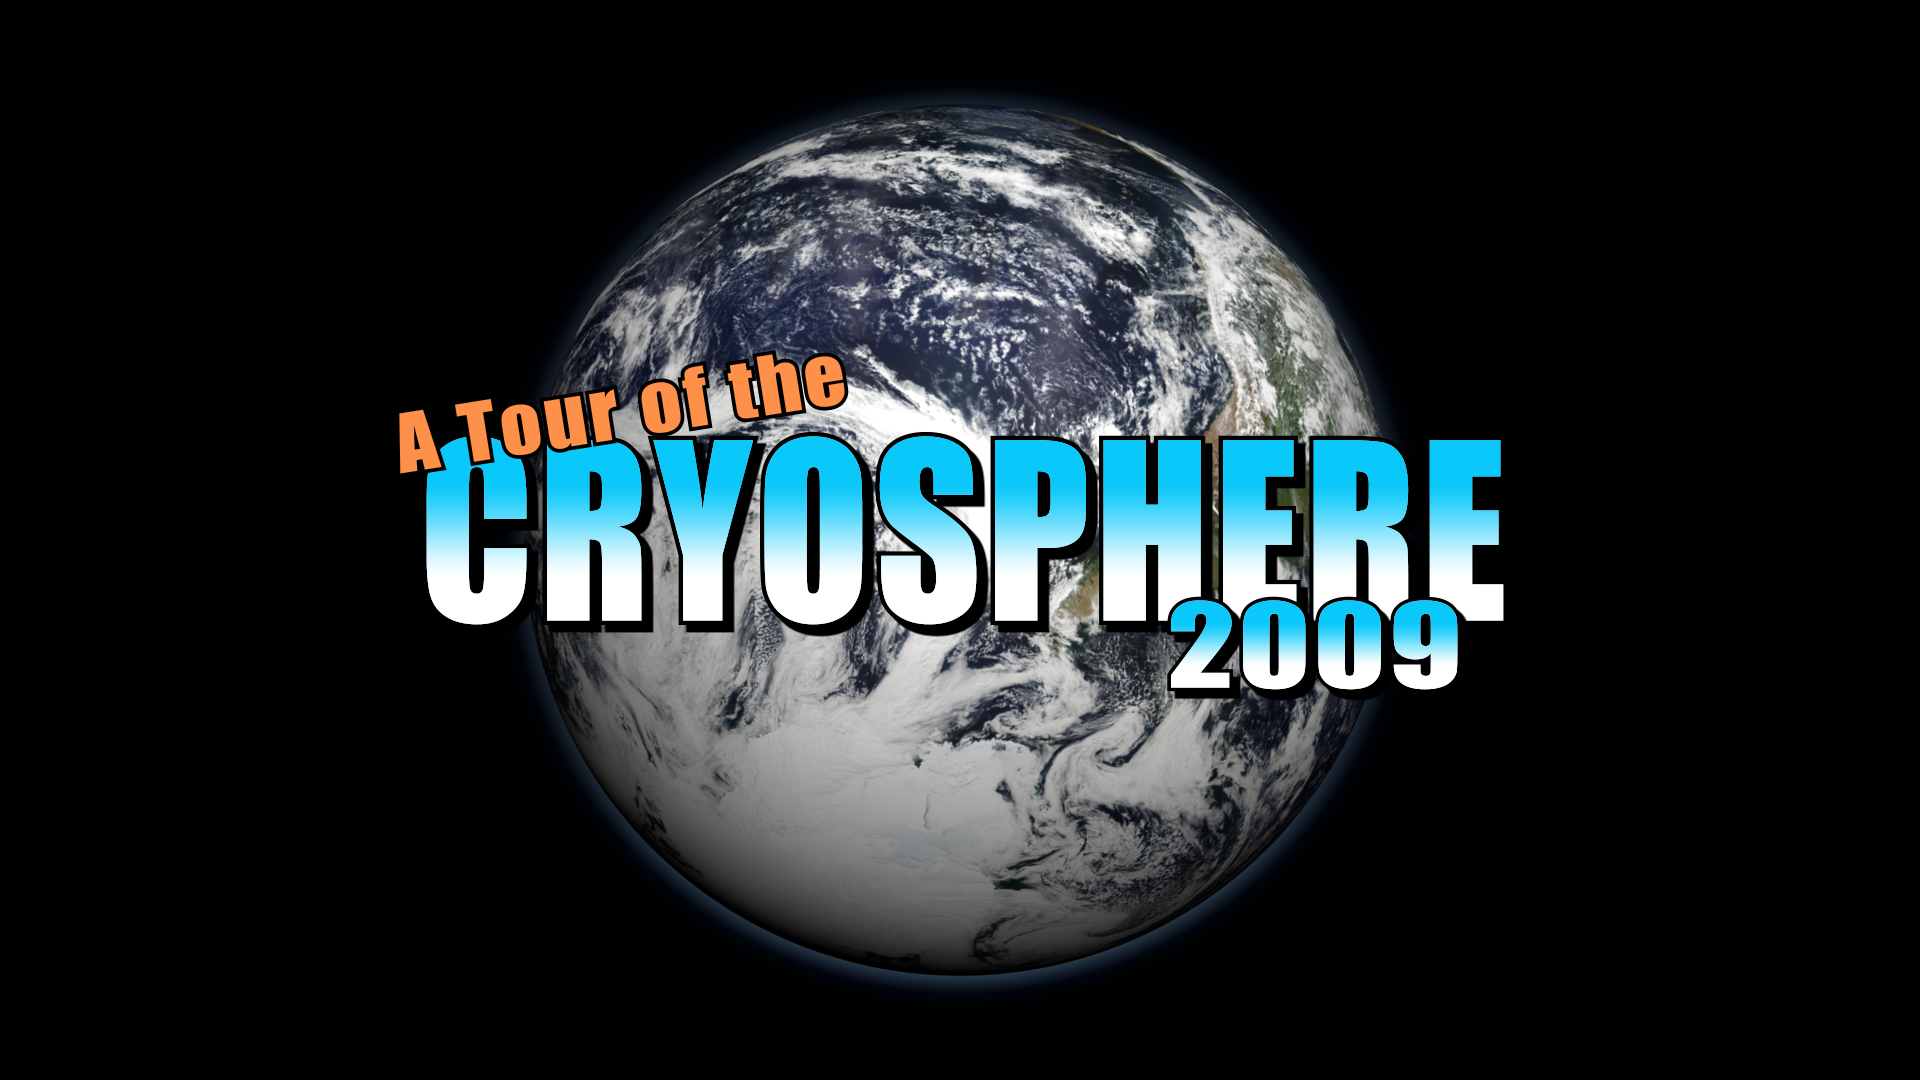 Preview Image for A Tour of the Cryosphere 2009